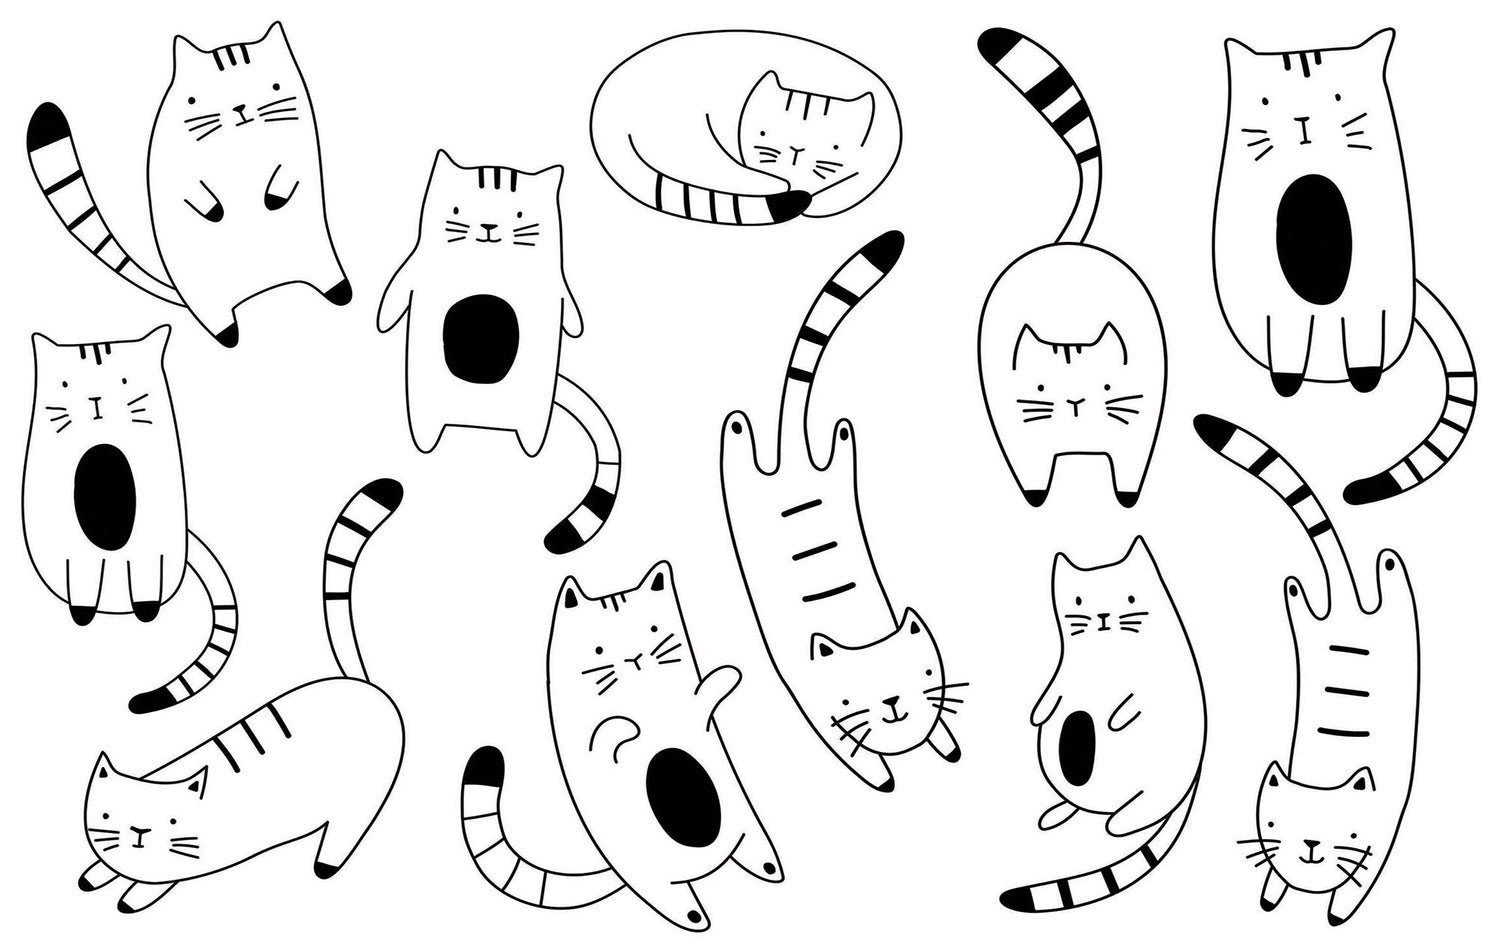 A black and white illustration of various playful and expressive cartoon cats on a wall mural.